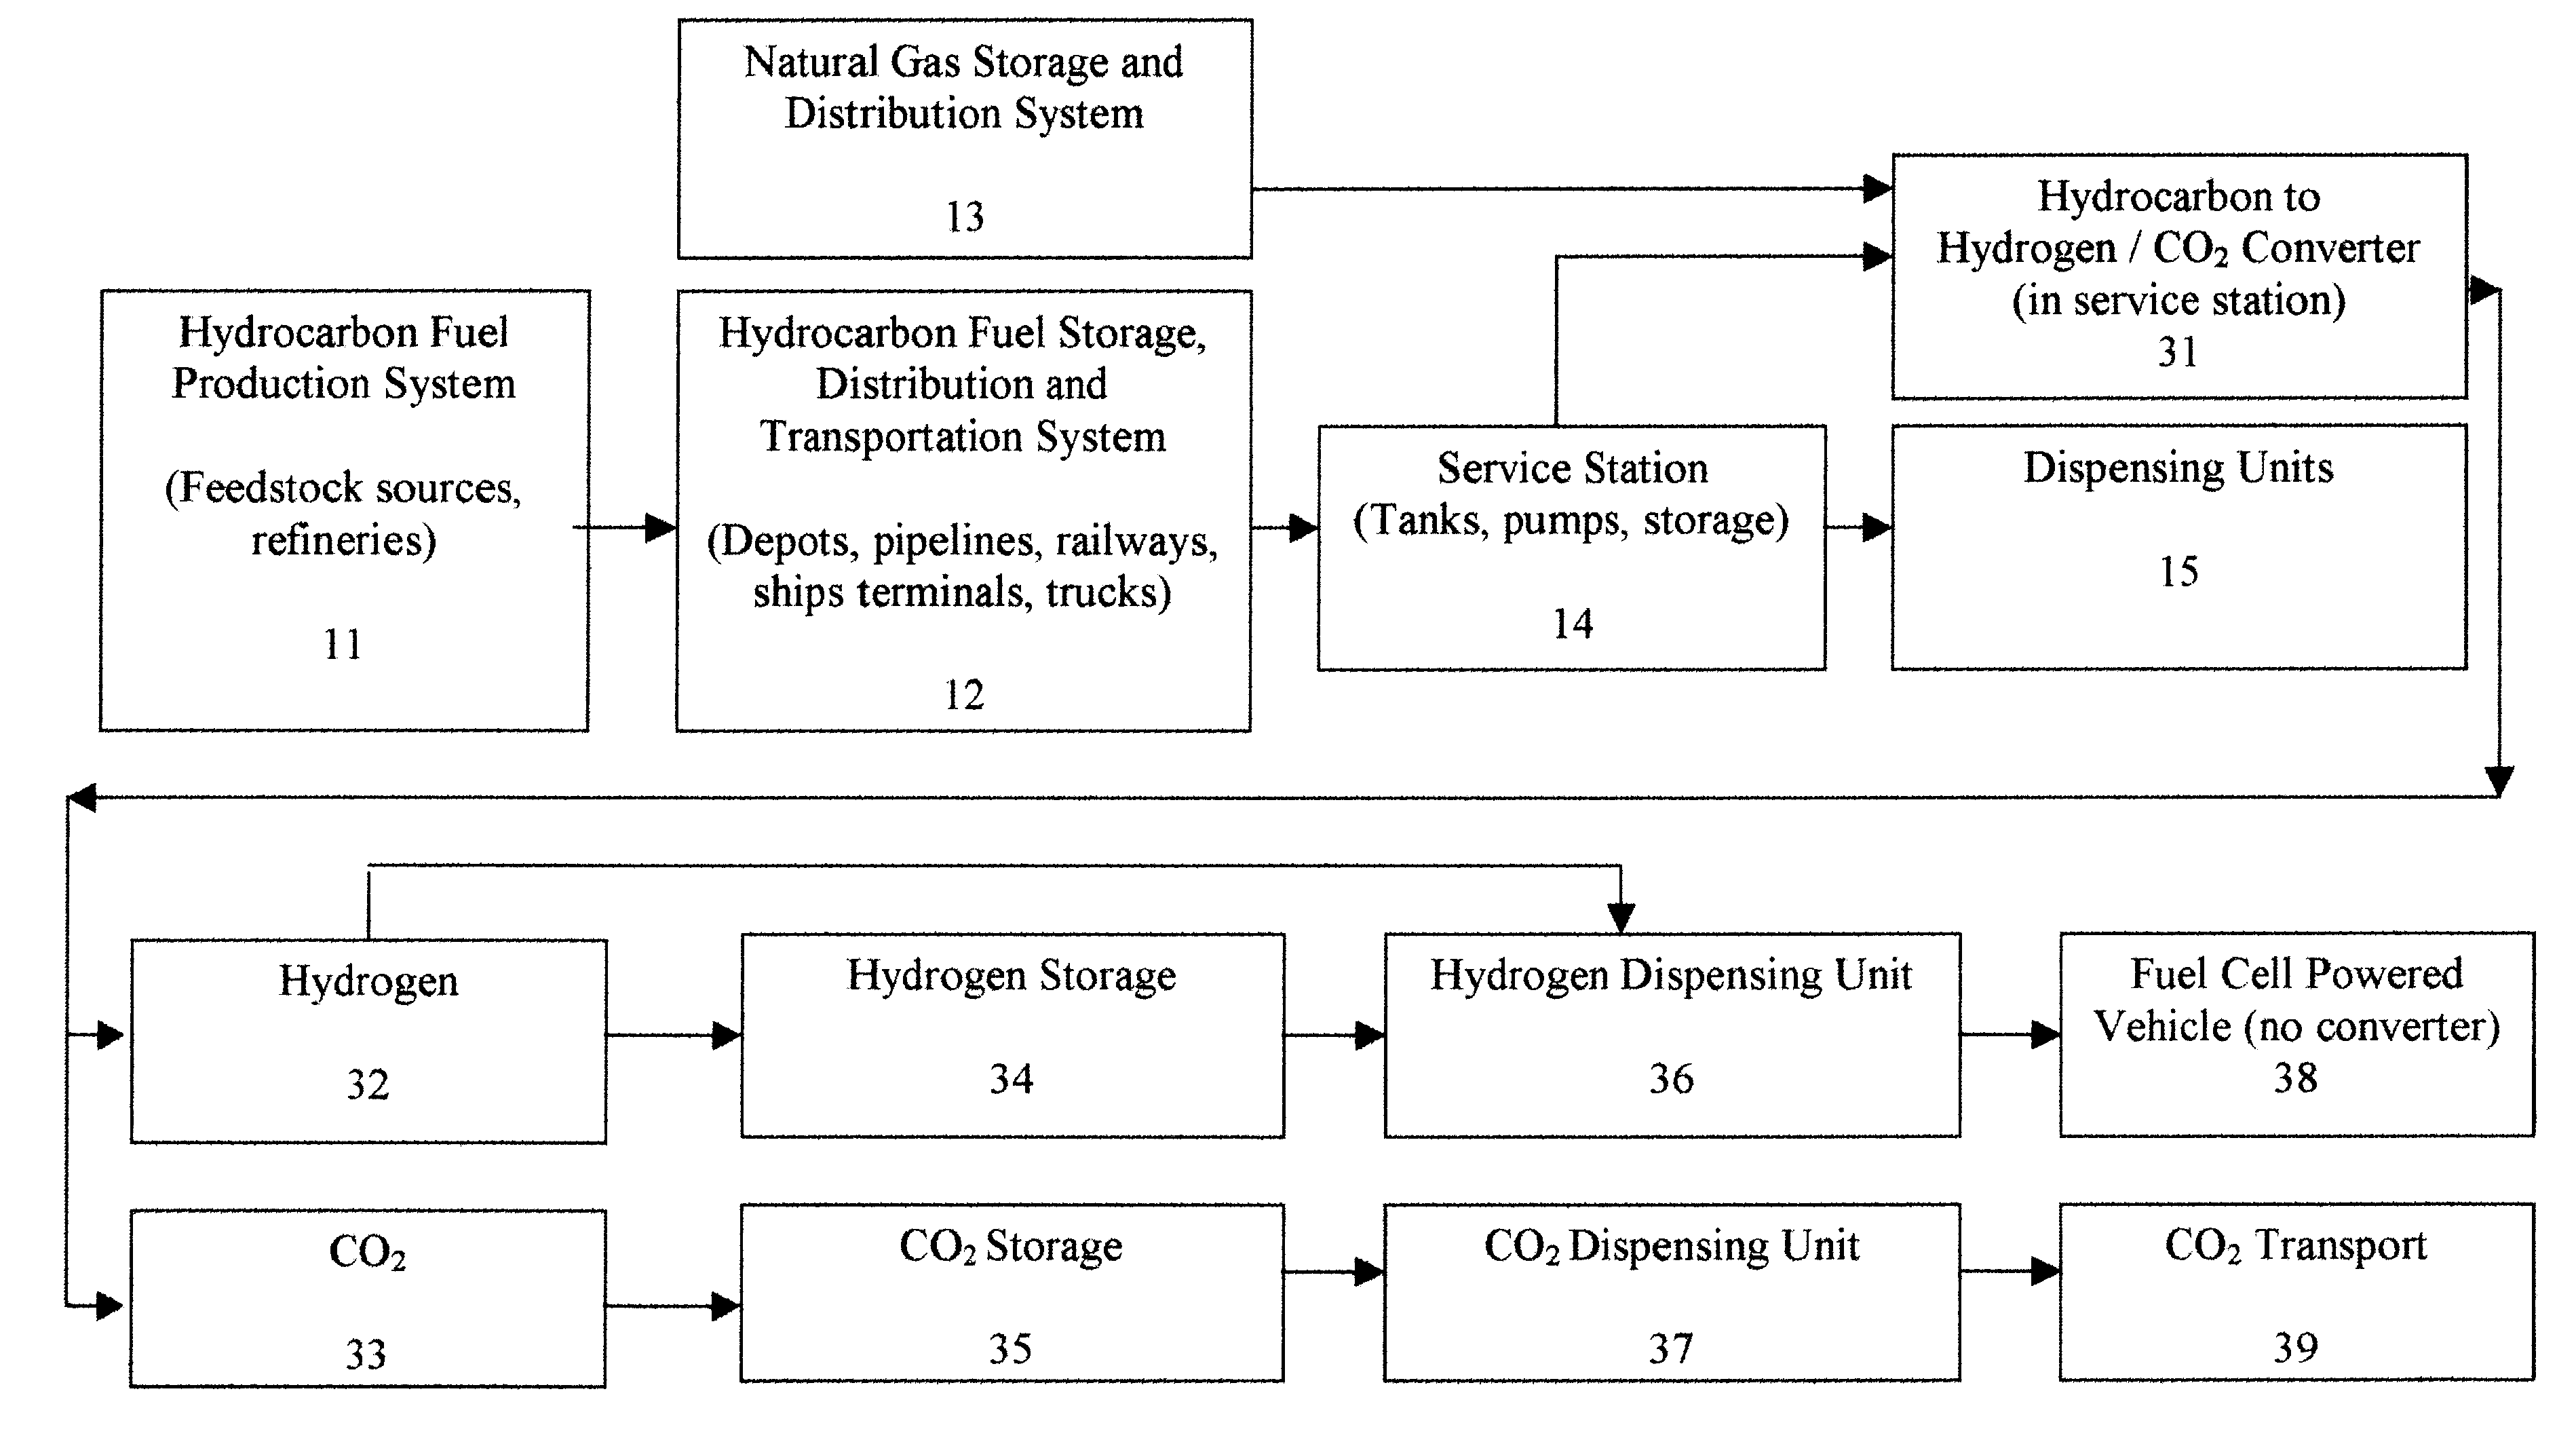 Apparatus and method for using the existing hydrocarbon distribution, storage and dispensing infrastructures for the production, distribution and dispensing of hydrogen